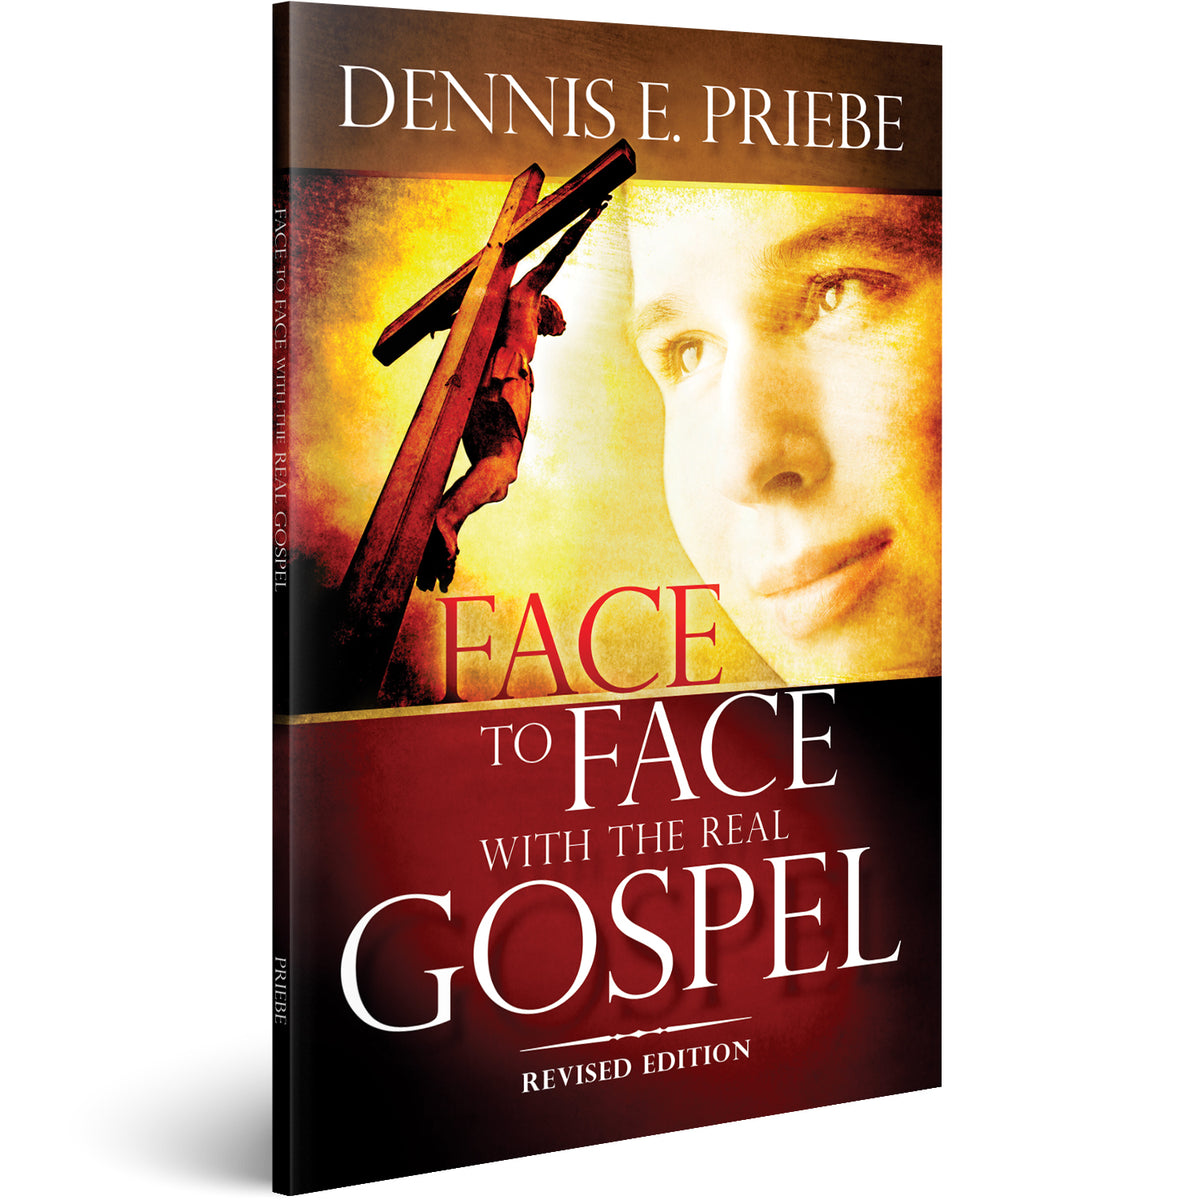 Face to Face with the Real Gospel (Revised) by Dennis Priebe